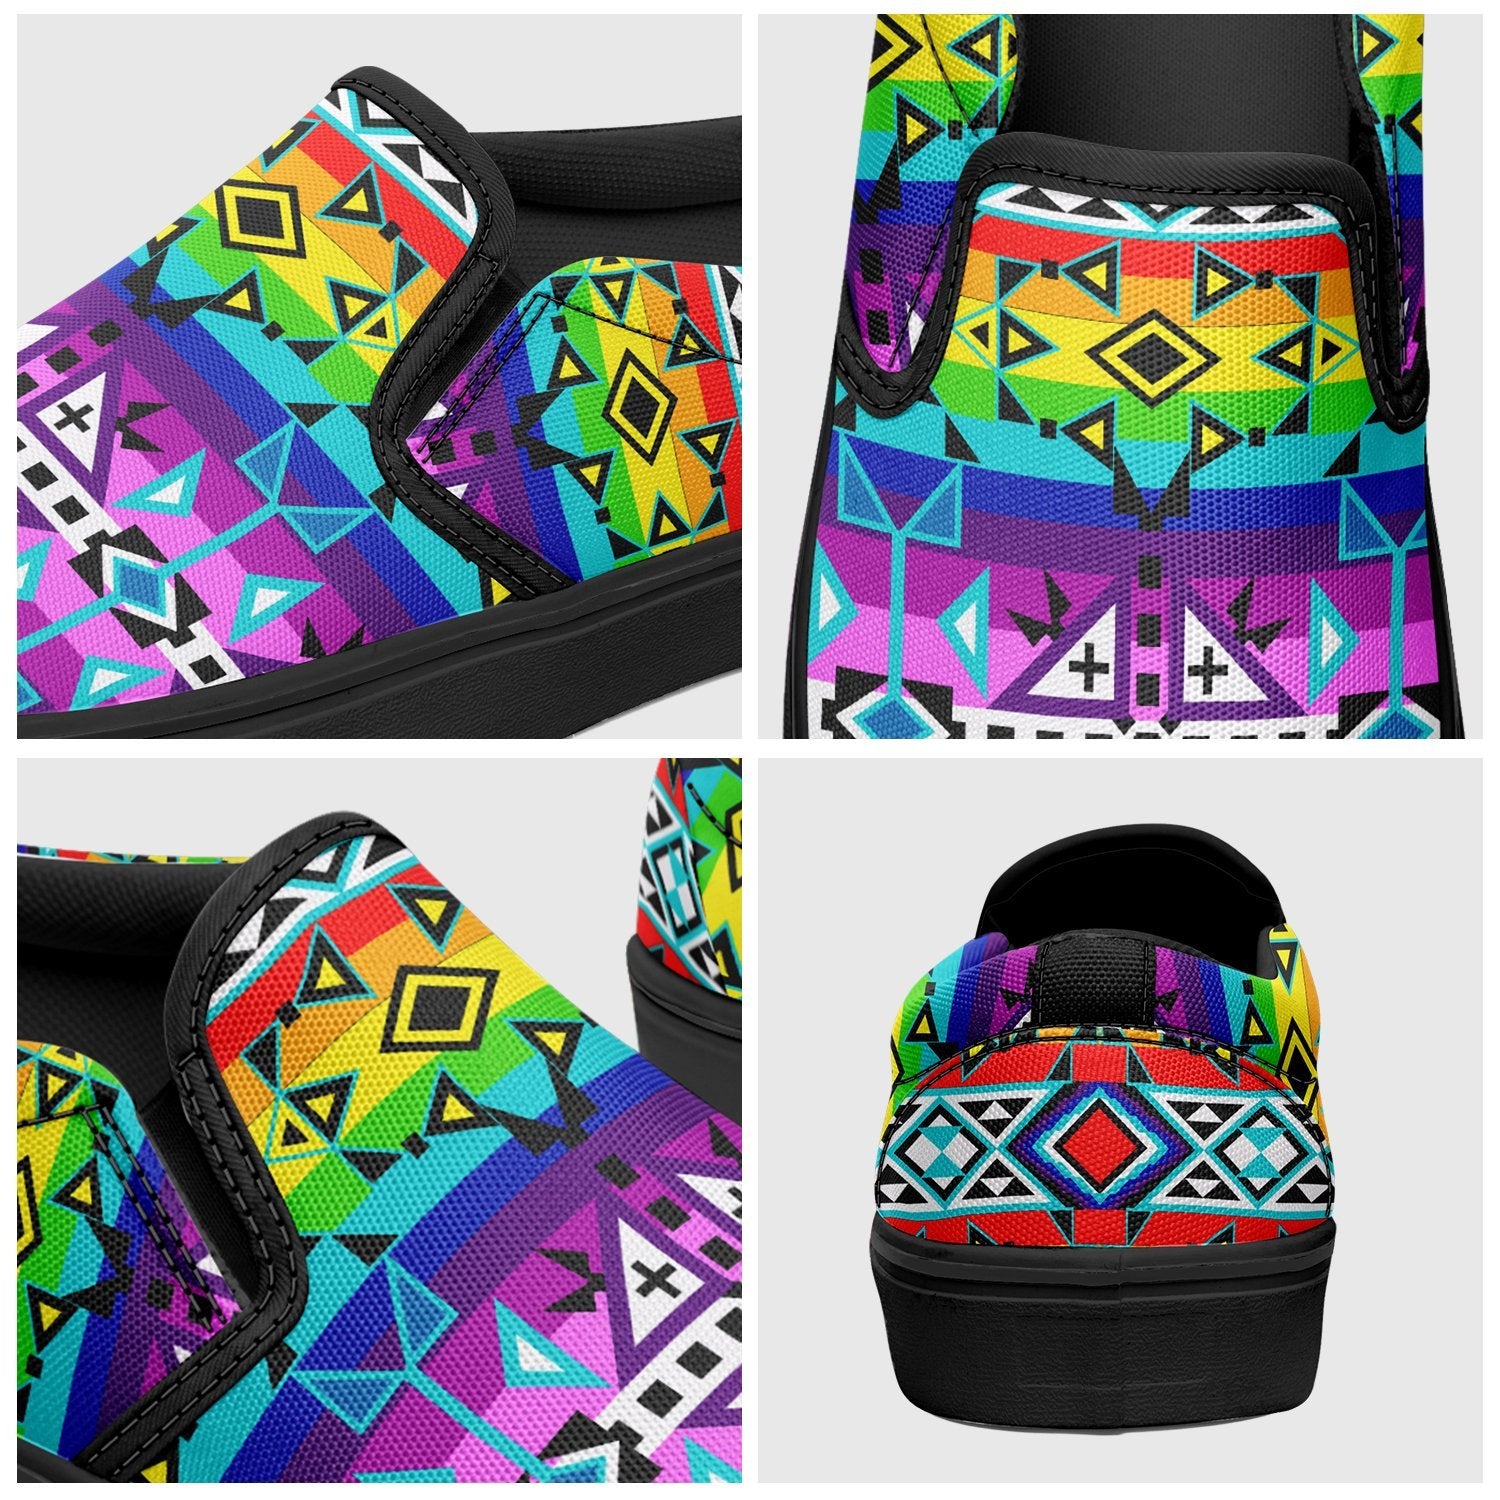 After the Rain Otoyimm Canvas Slip On Shoes 49 Dzine 